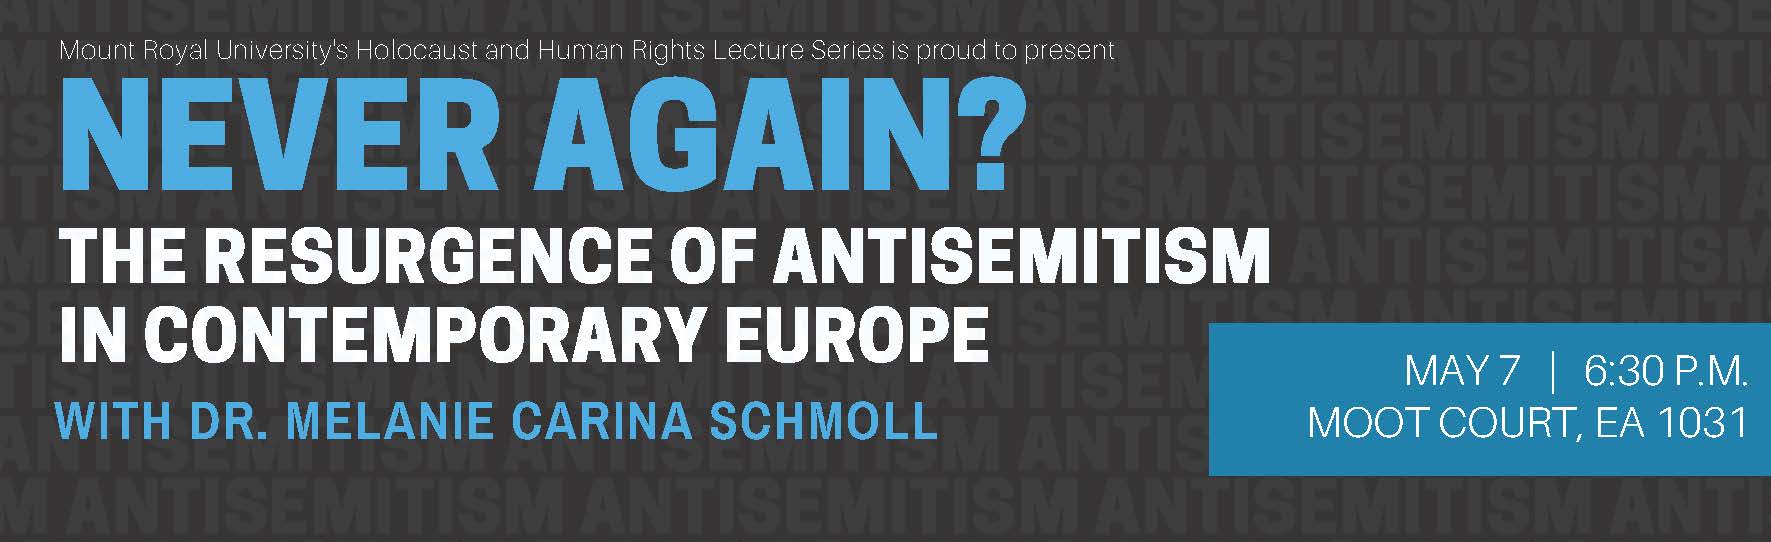 Arts Holocaust Lecture Series-Never Again